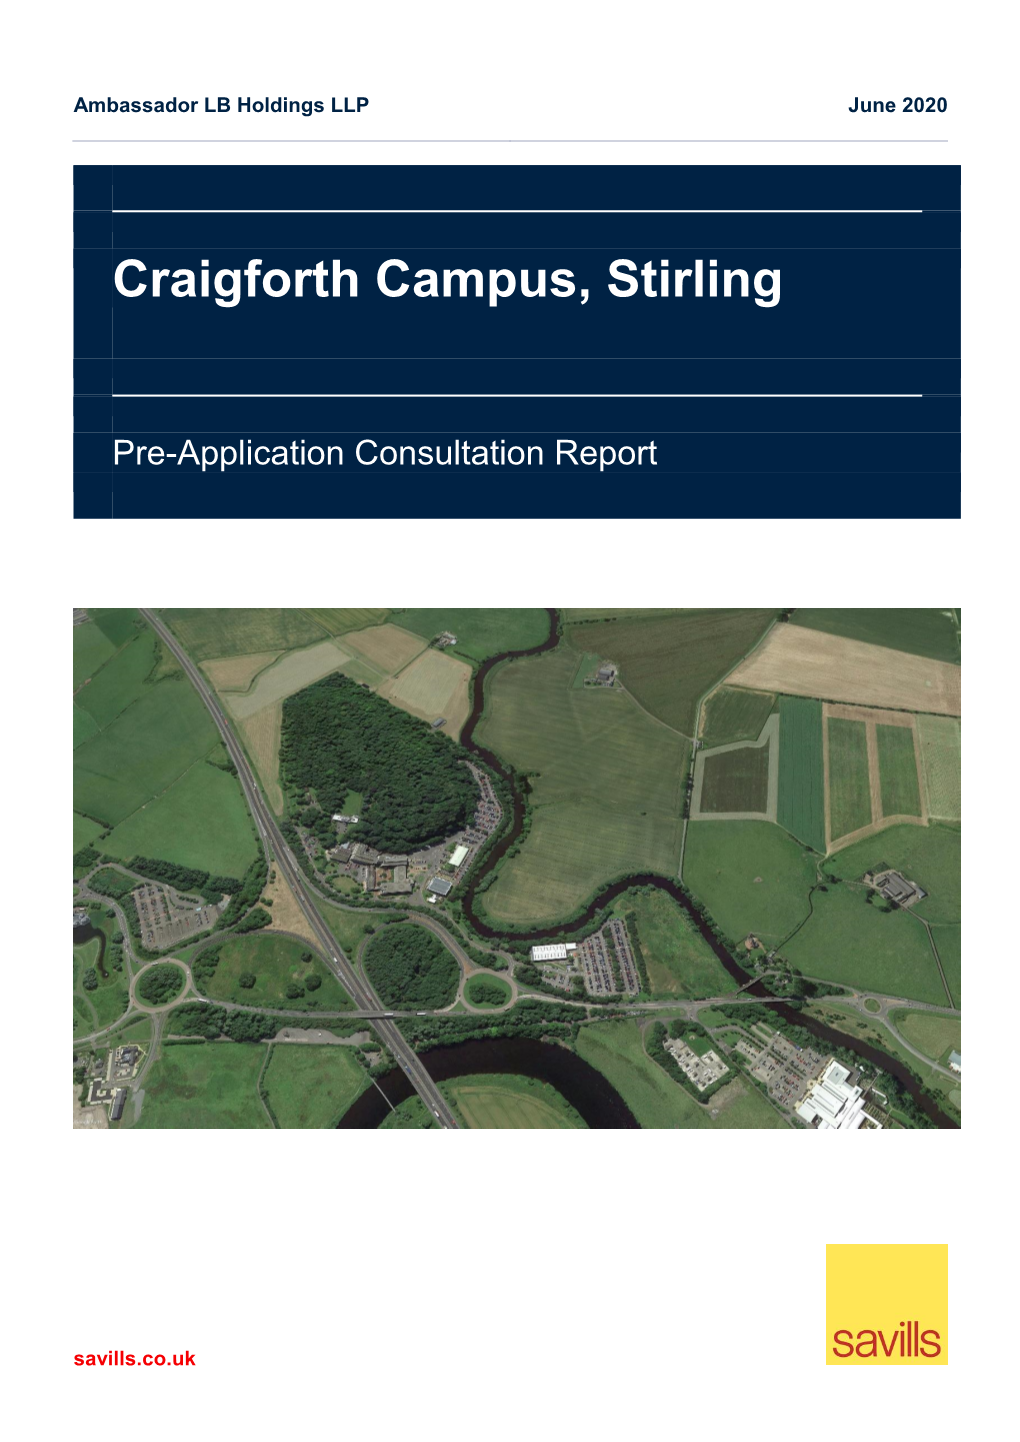 PAC Report Sets out the Pre-Application Consultation That Has Been Carried out in Accordance with The